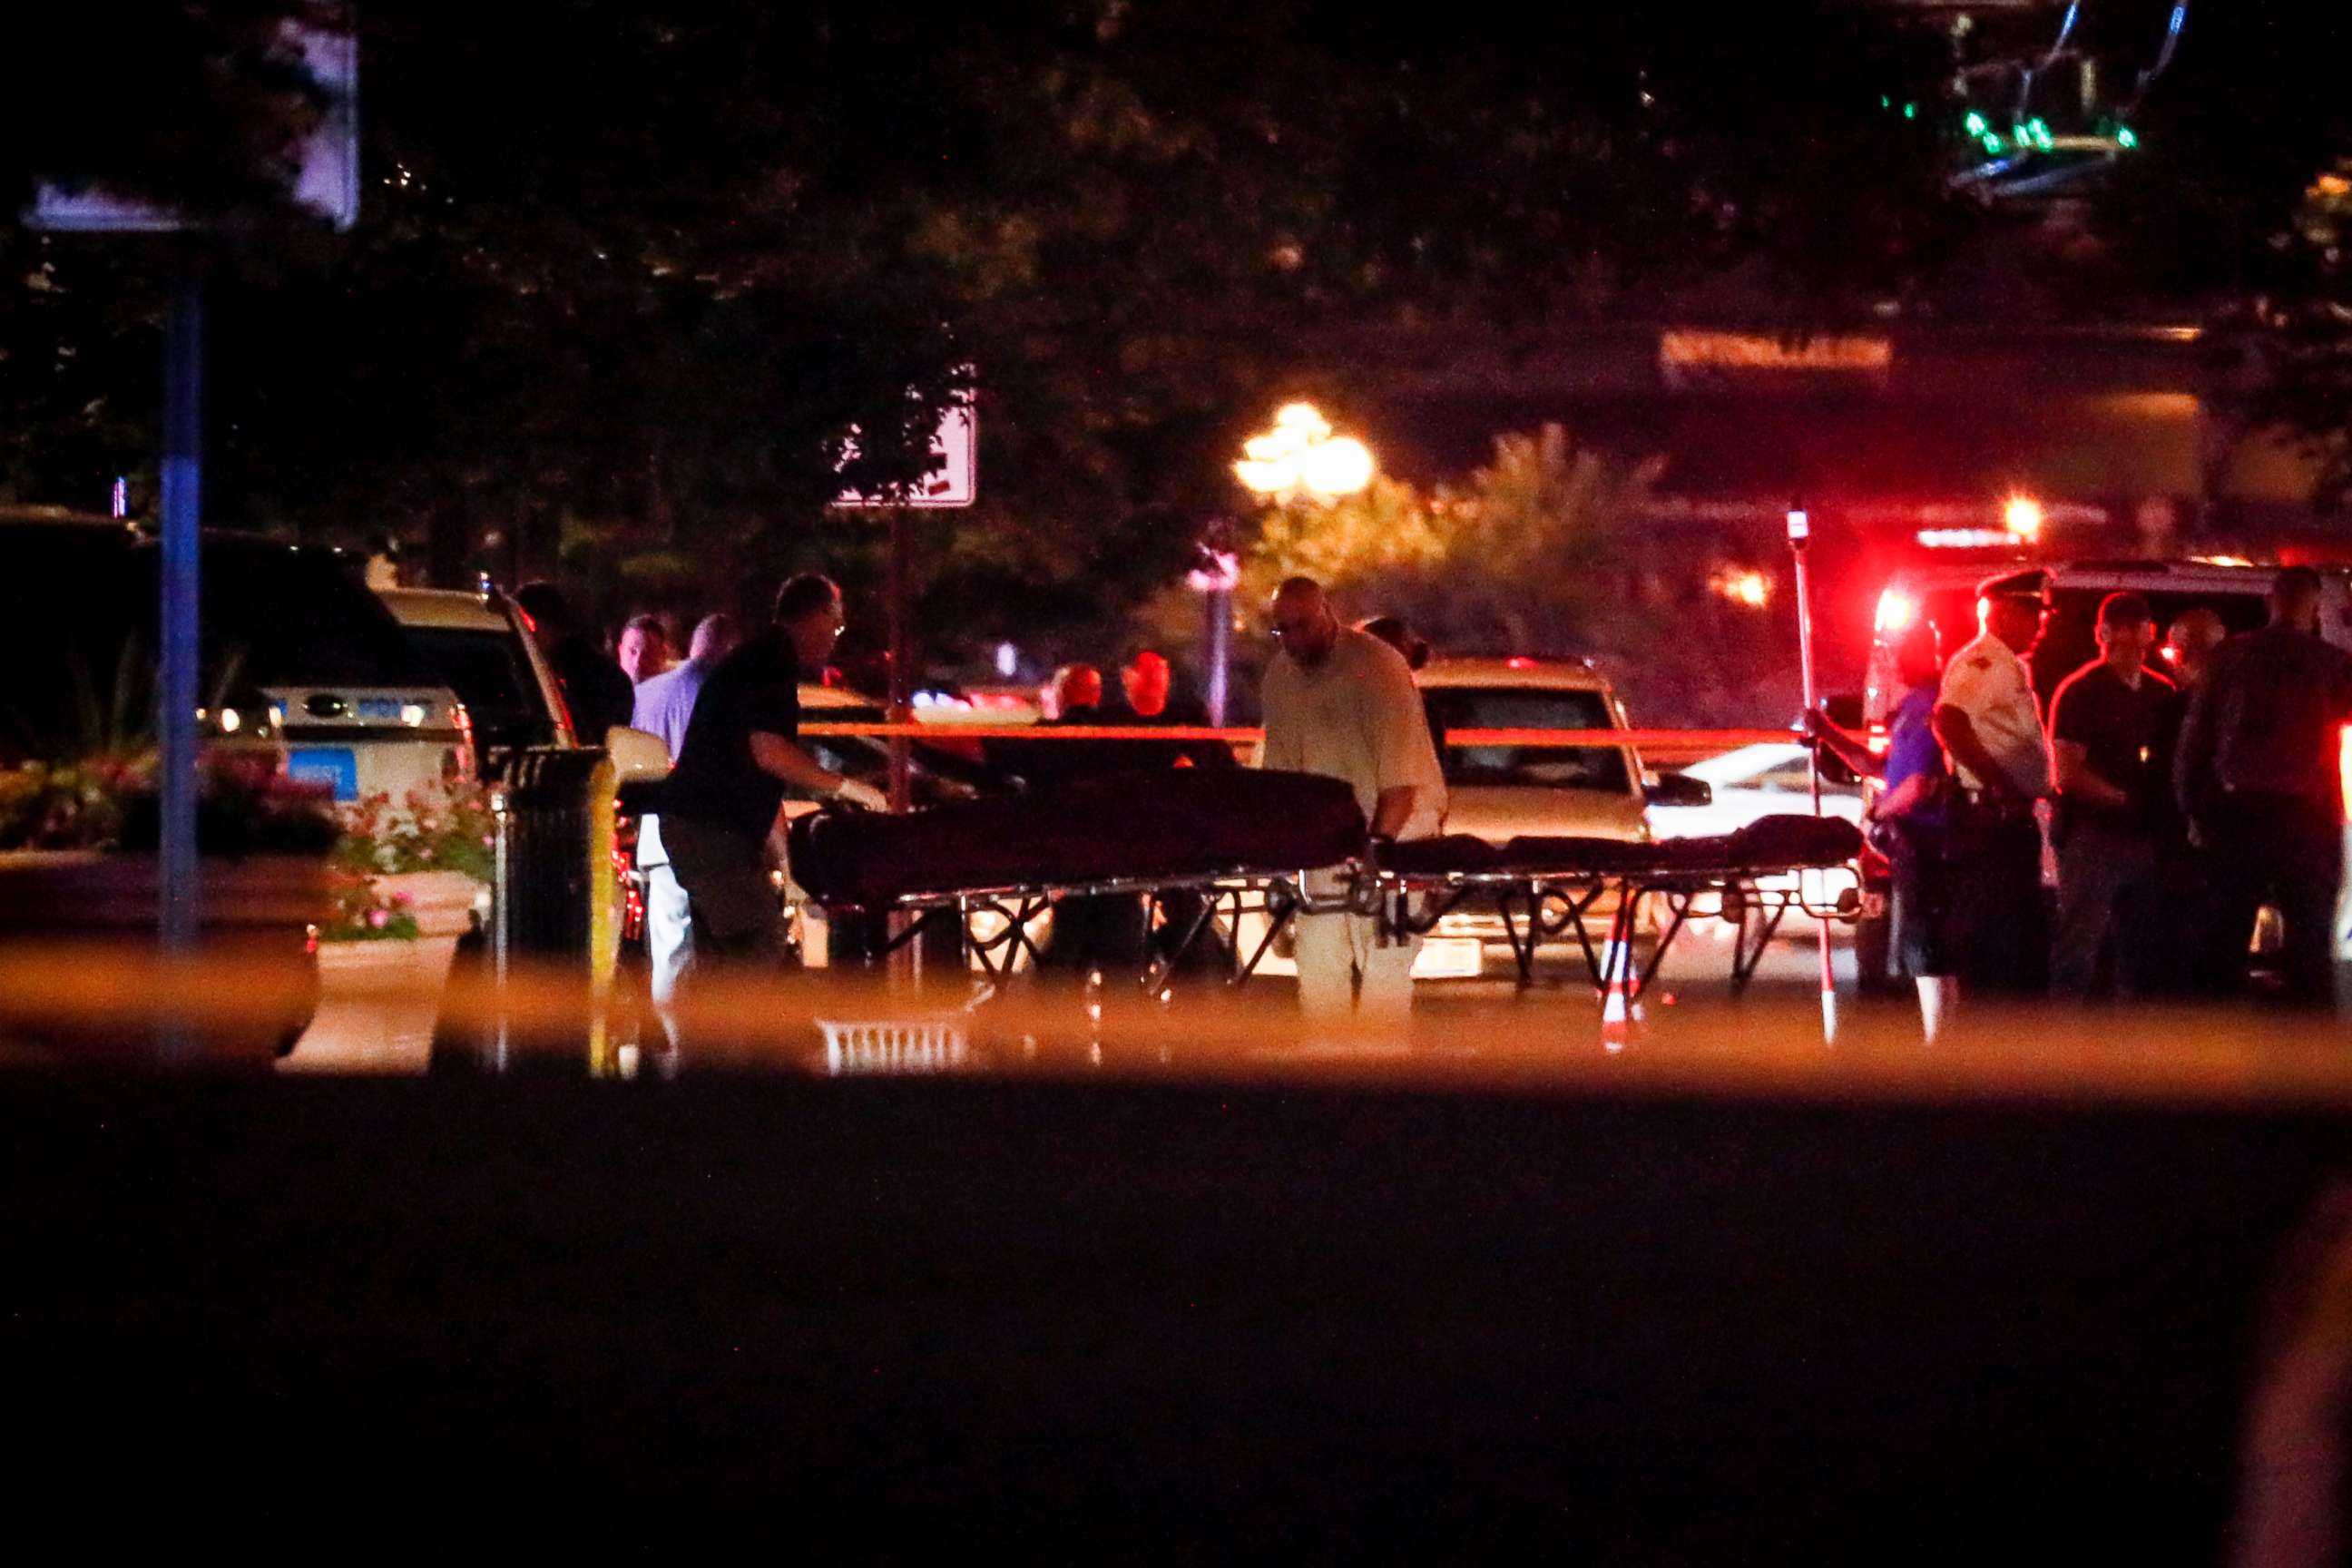 PHOTO: Bodies are removed from at the scene of a mass shooting, Sunday, Aug. 4, 2019, in Dayton, Ohio.